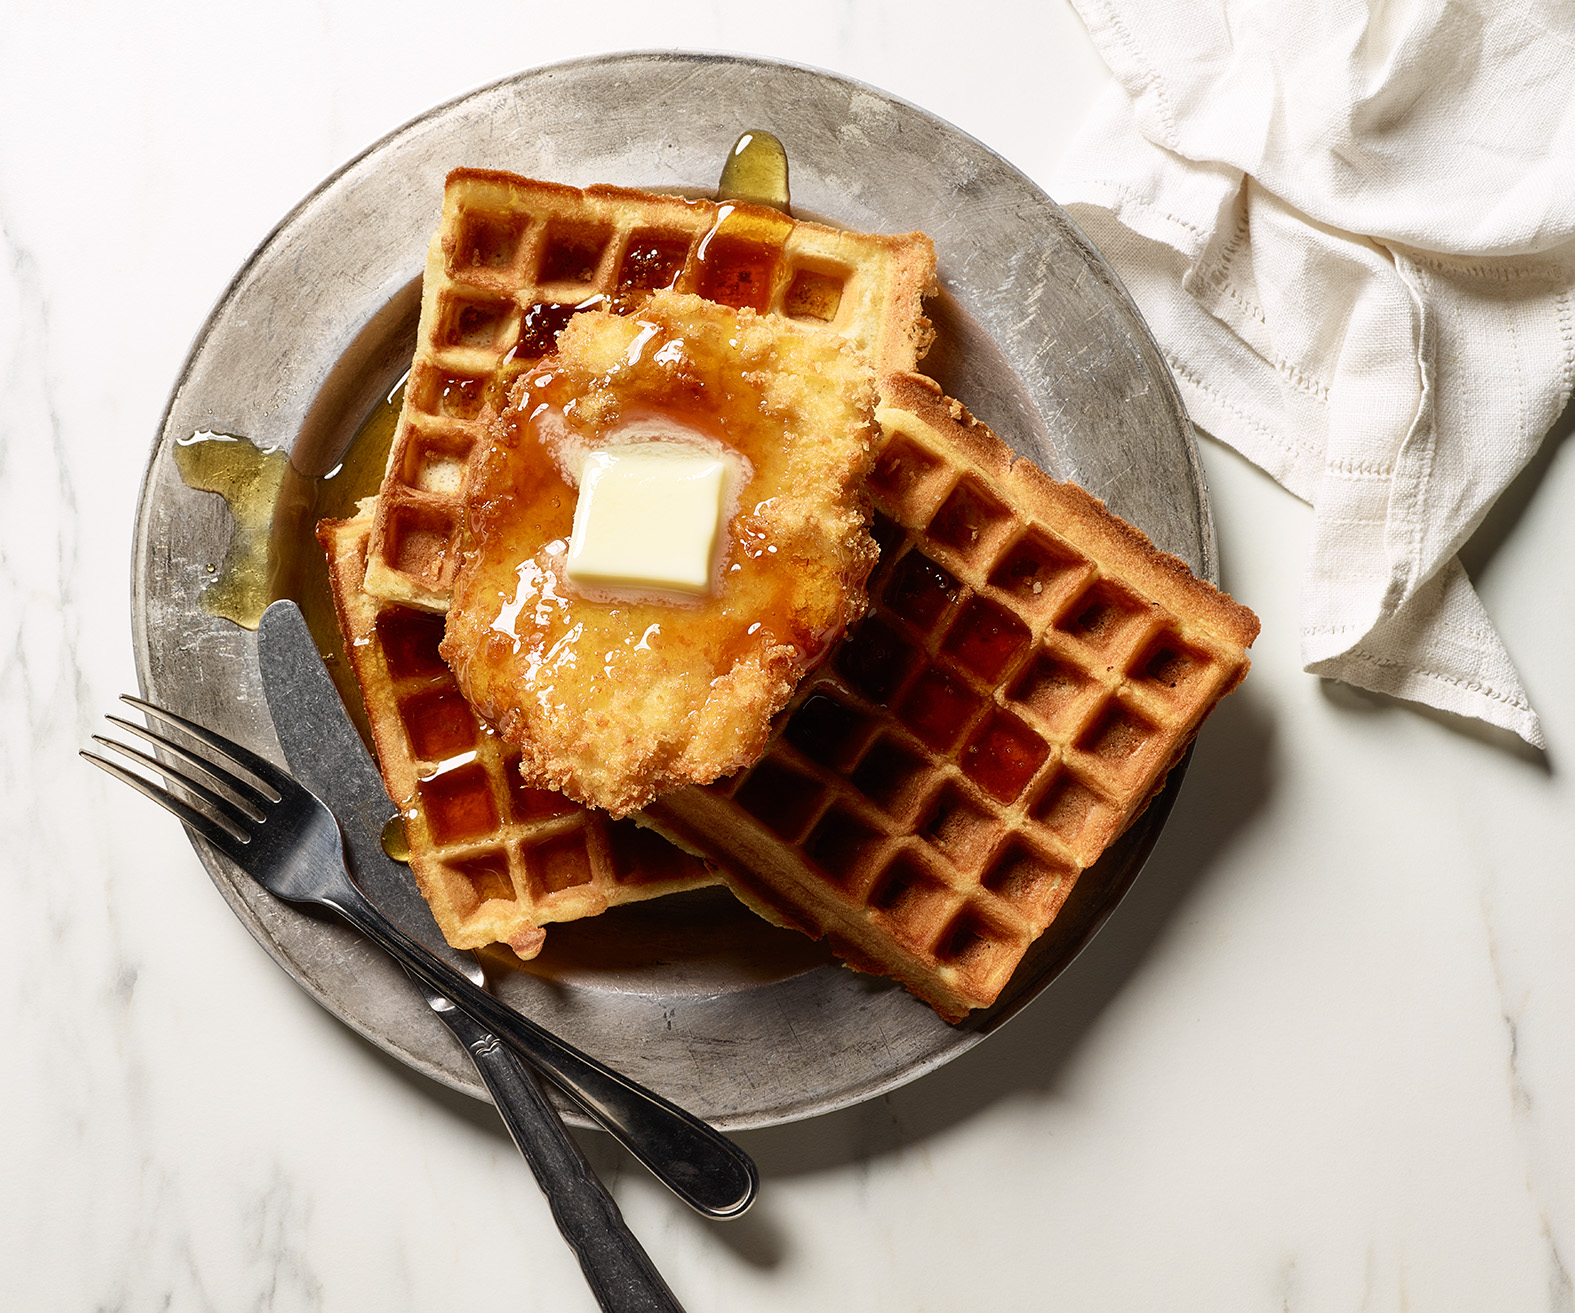 chicken-and-waffles